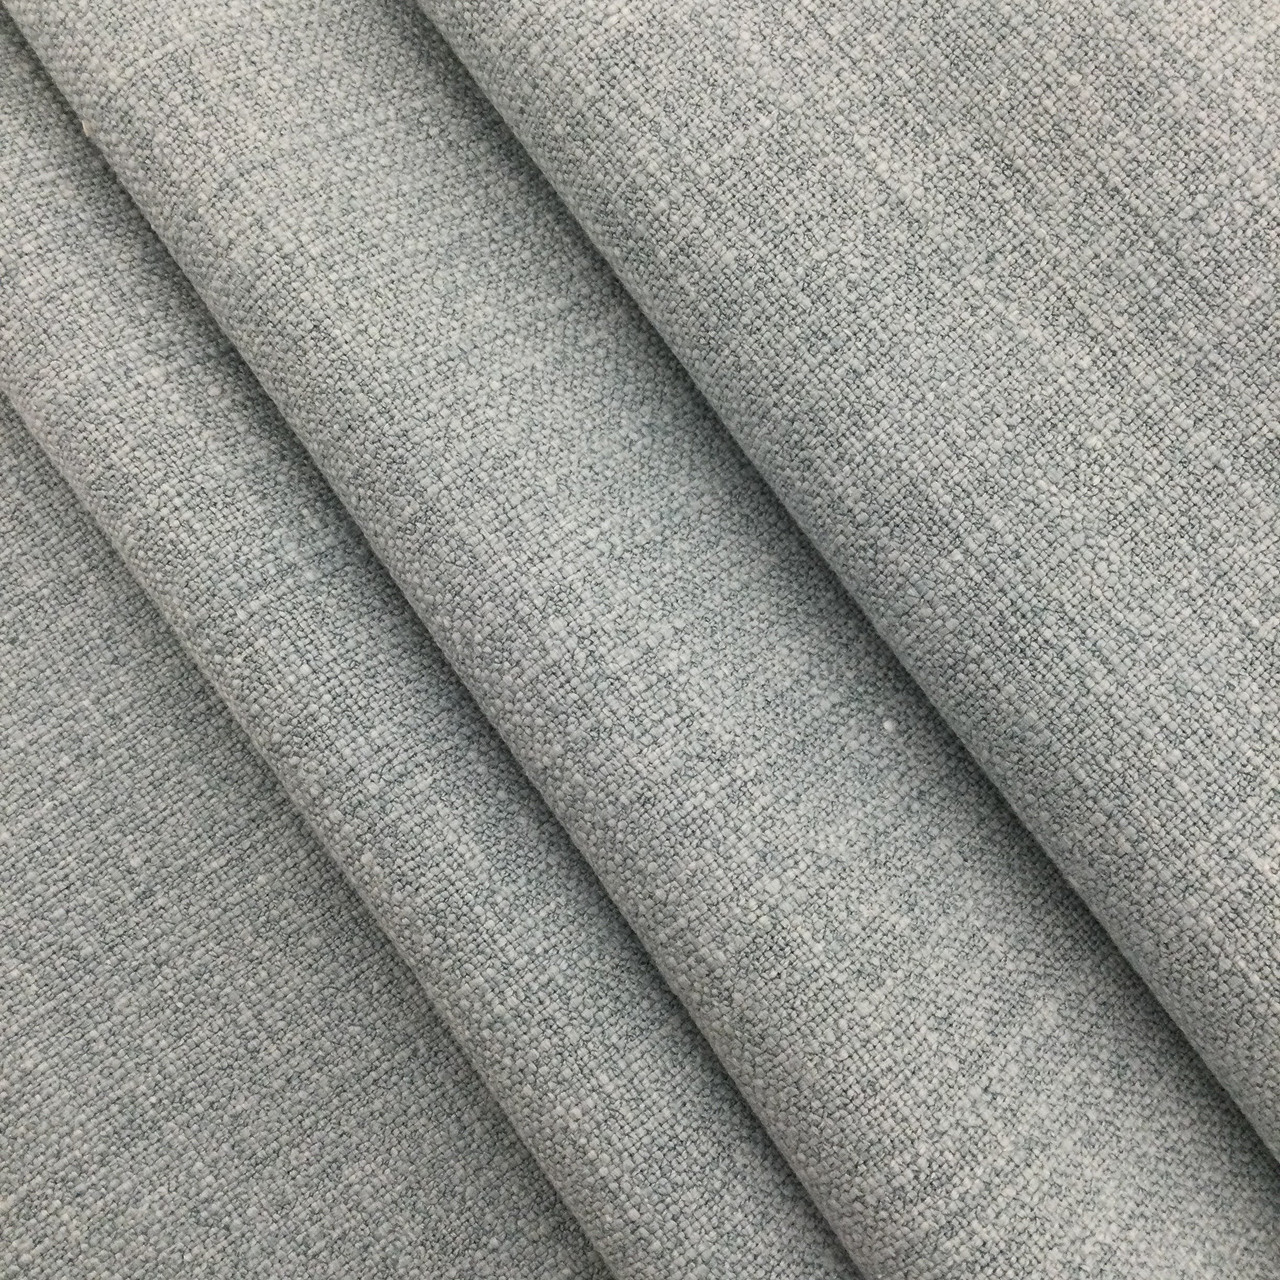 Linen Fabric Slub Weave in Ocean Blue, Upholstery / Slipcovers / Curtains, Poly / Cotton / Linen Blend, 55 Wide, By the Yard